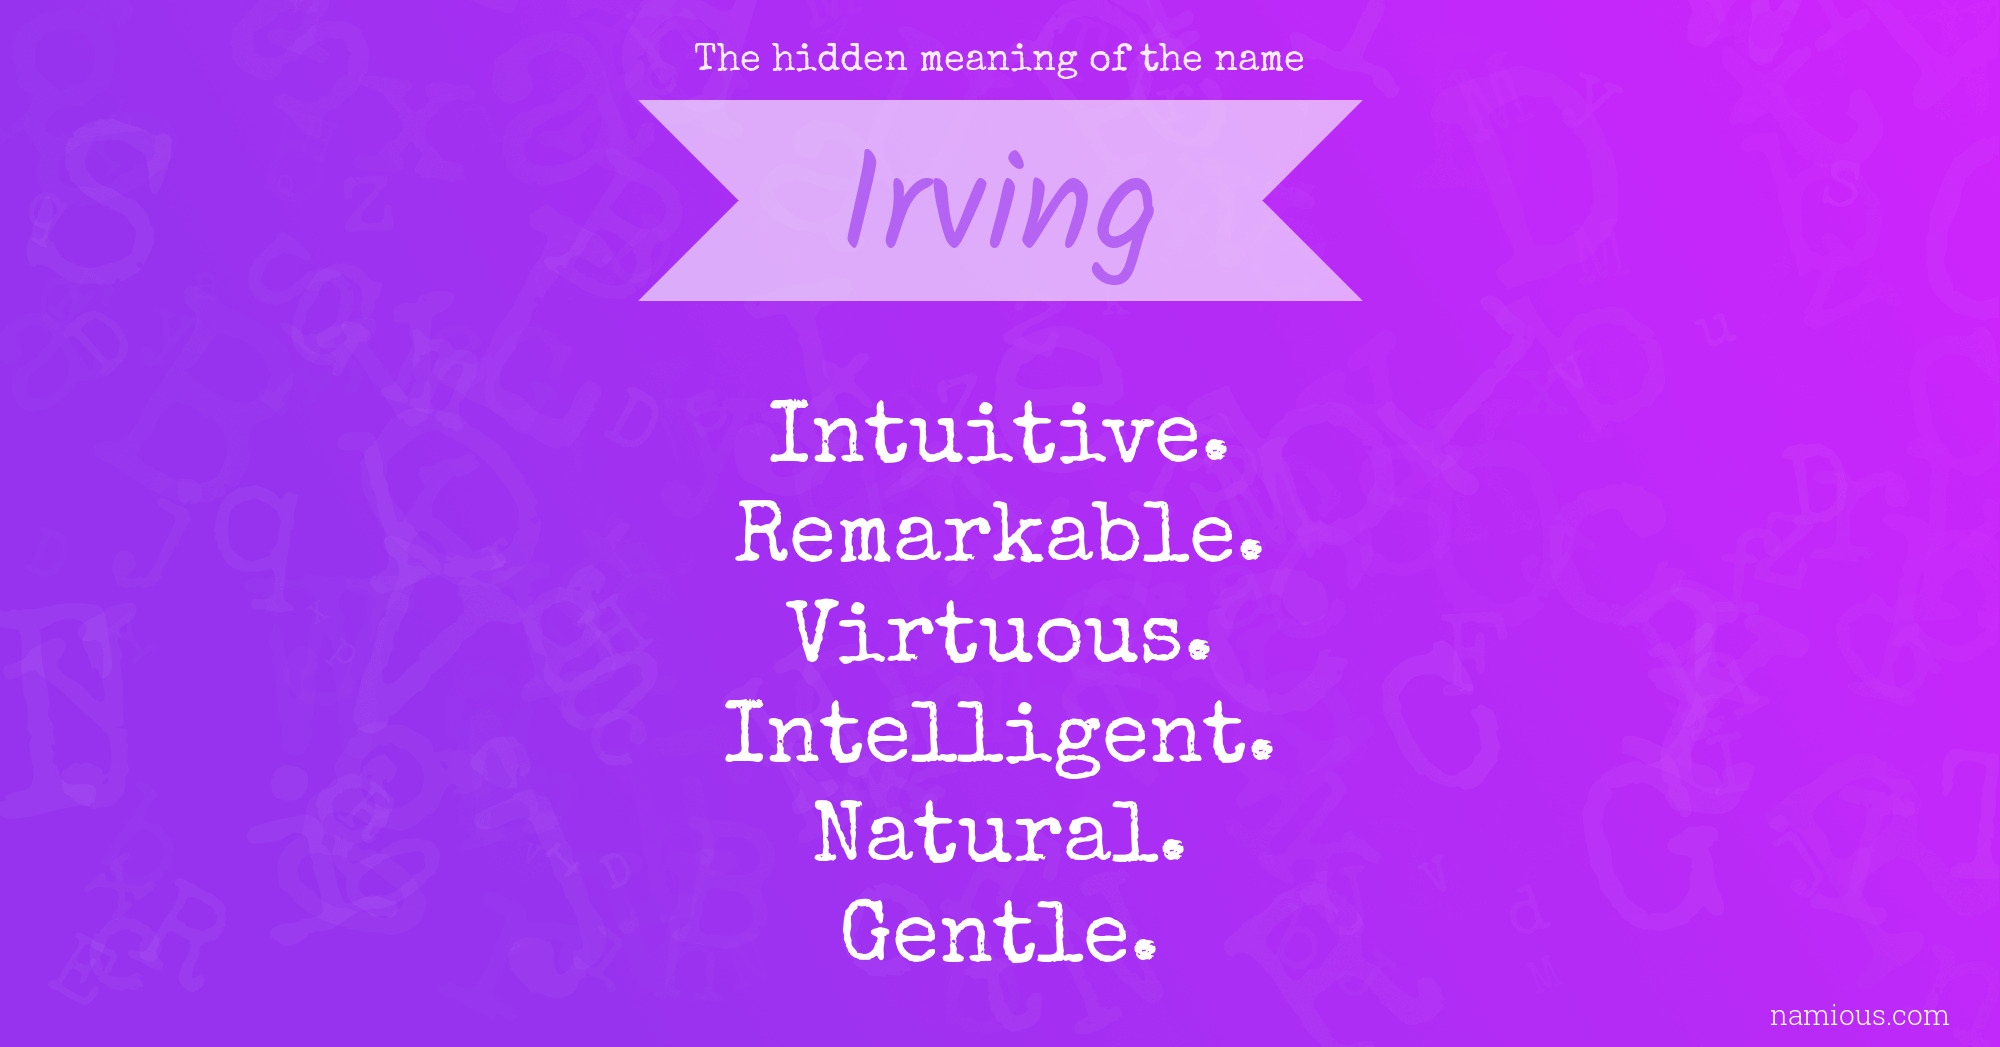 The hidden meaning of the name Irving